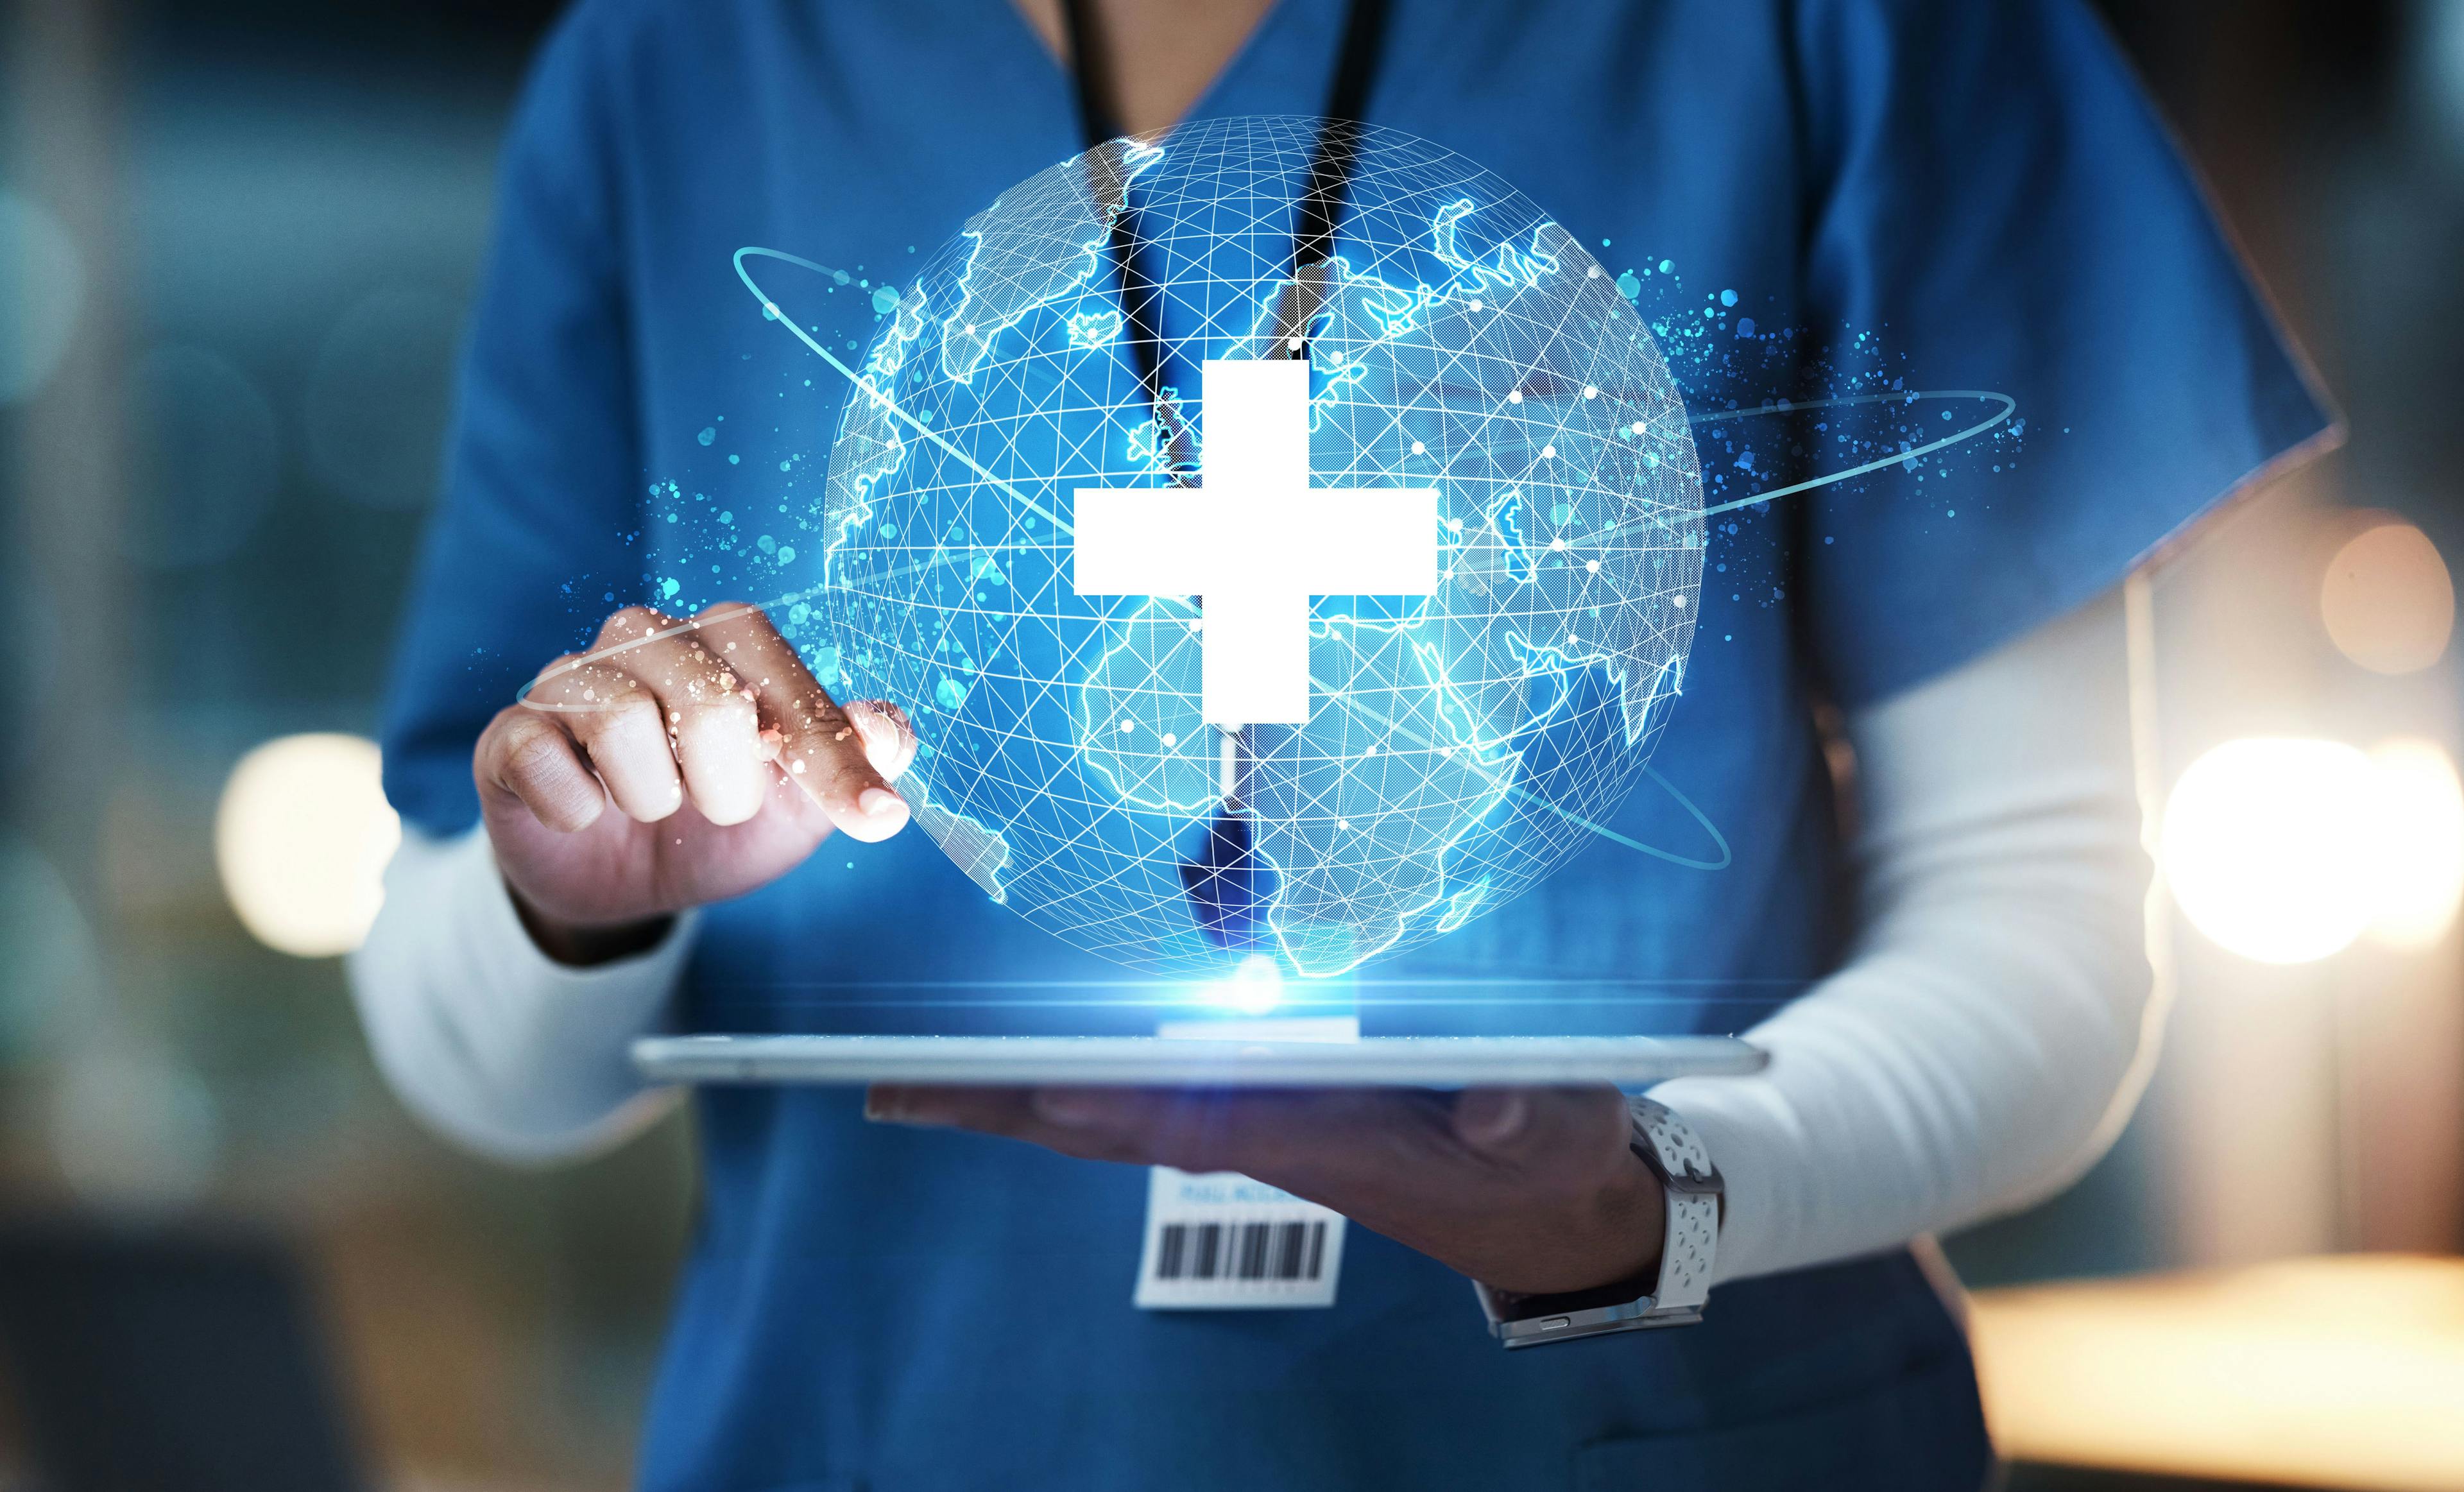 Nurse, hands or technology for 3d globe networking, healthcare community or digital help in life insurance support. Zoom, medical or futuristic world for global hospital, woman or doctor on tablet ux. Image Credit: Adobe Stock Images/C Malambo/peopleimages.com